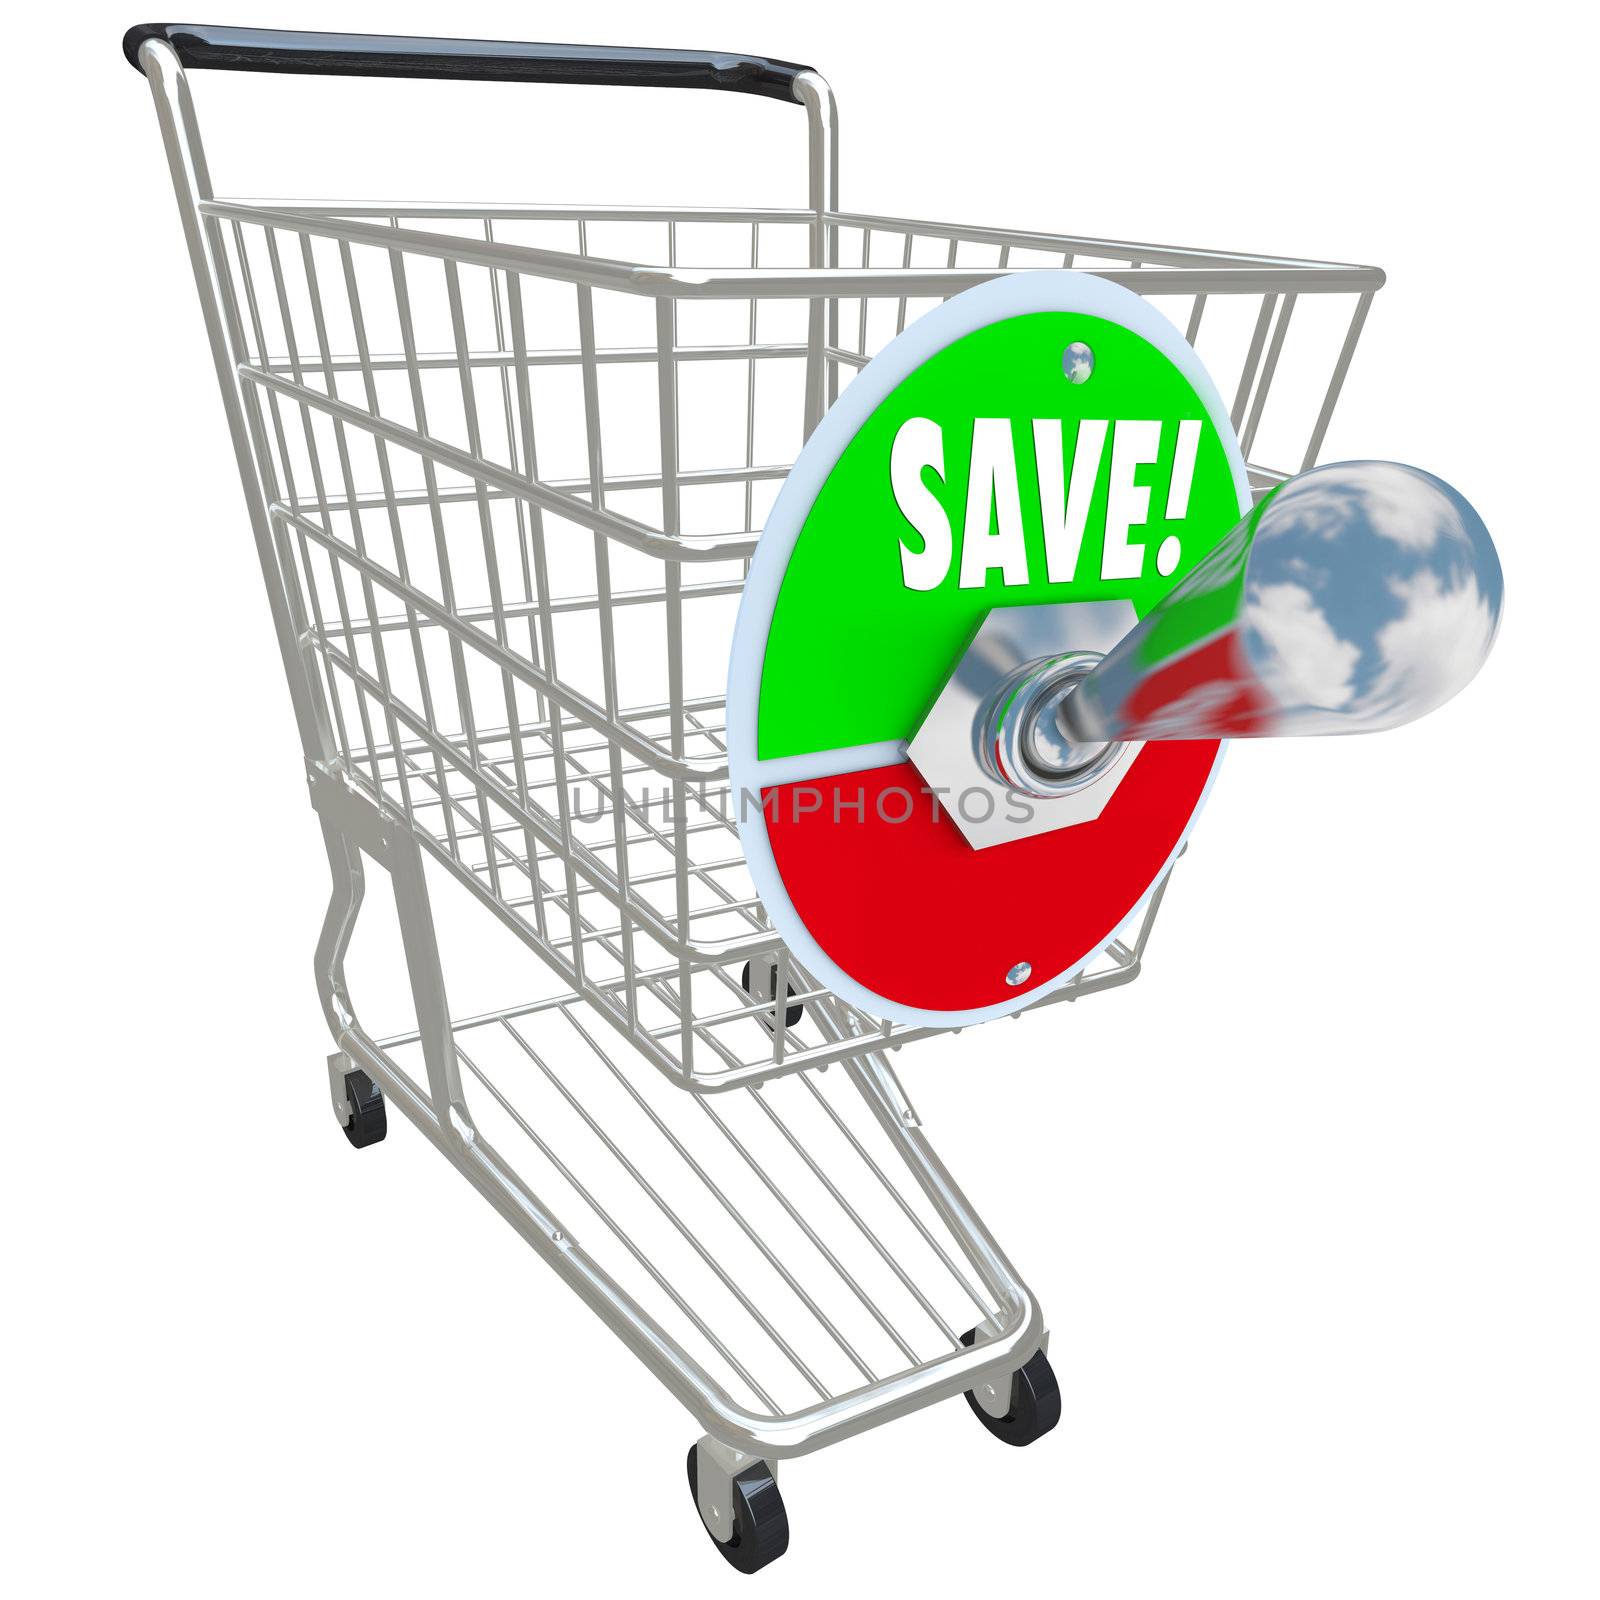 Shopping Cart with Sale Switch for Maximum Savings by iQoncept